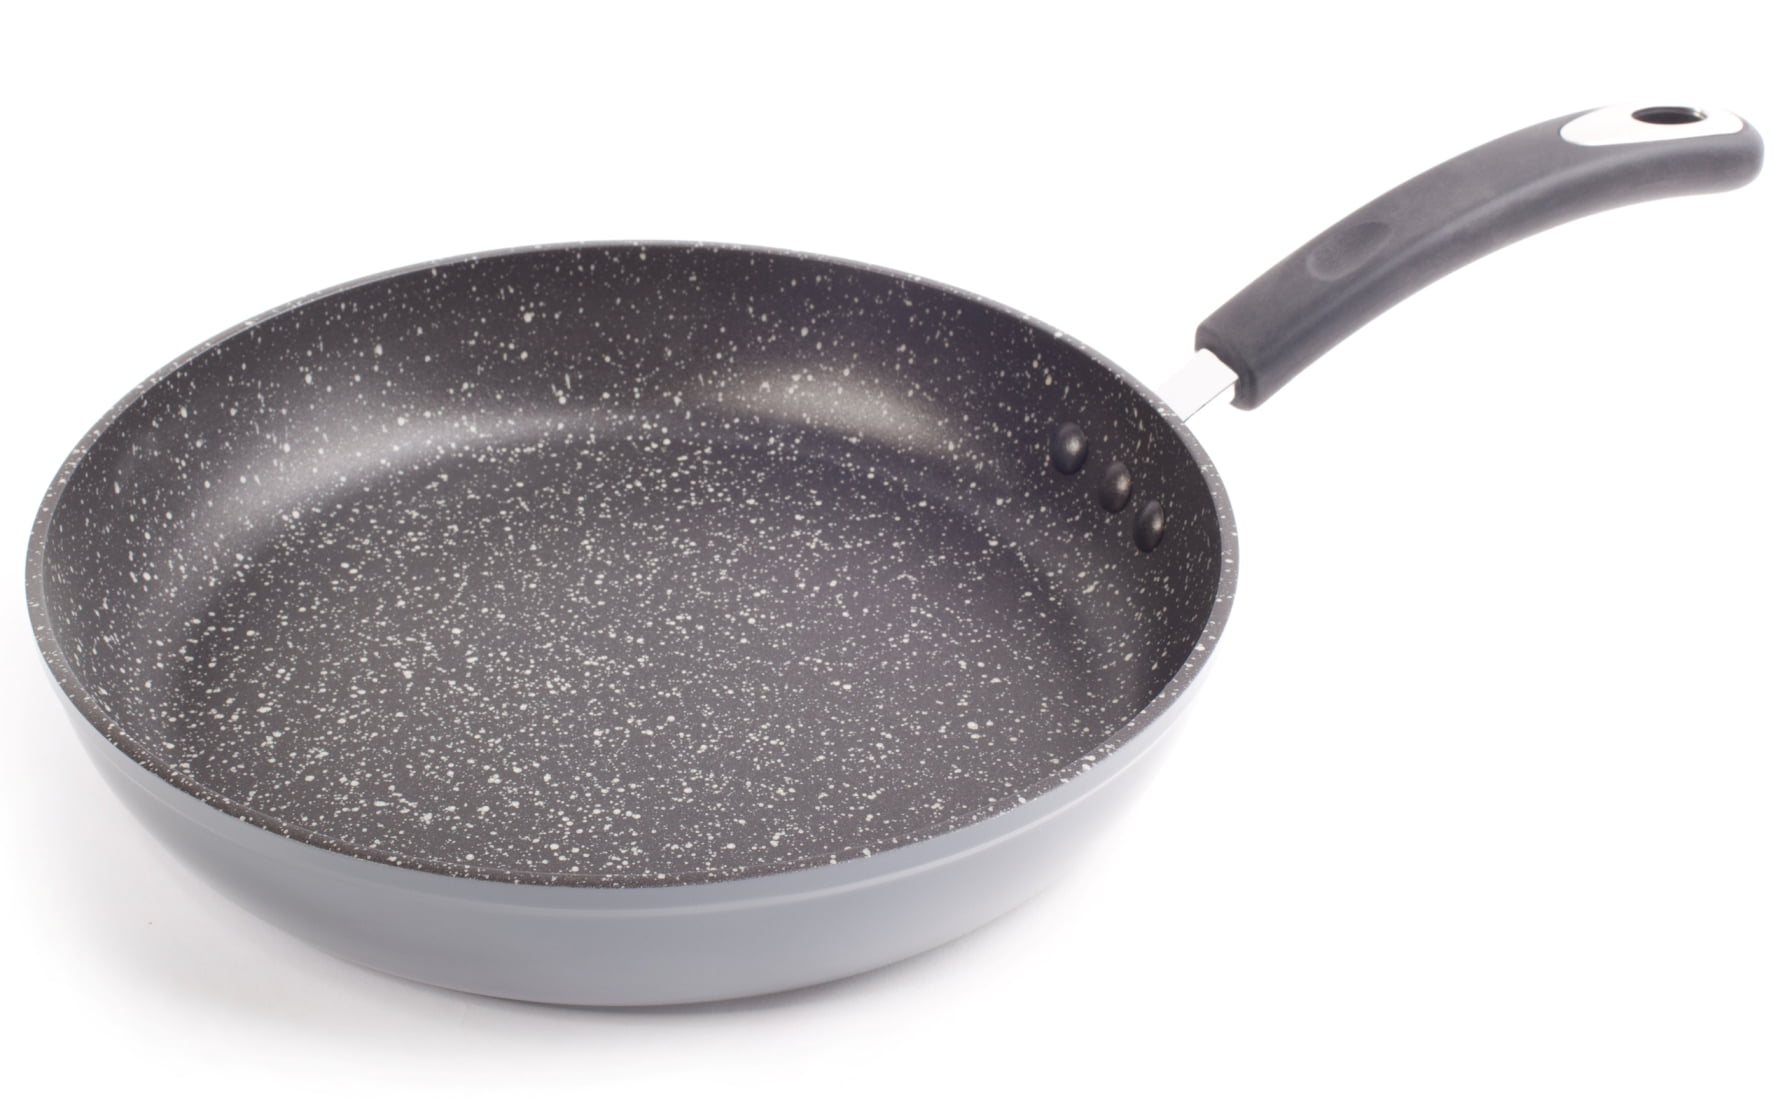 12 Stone Earth Frying Pan by Ozeri with 100% APEO & PFOA-Free Stone-Derived Non-Stick Coating from Germany